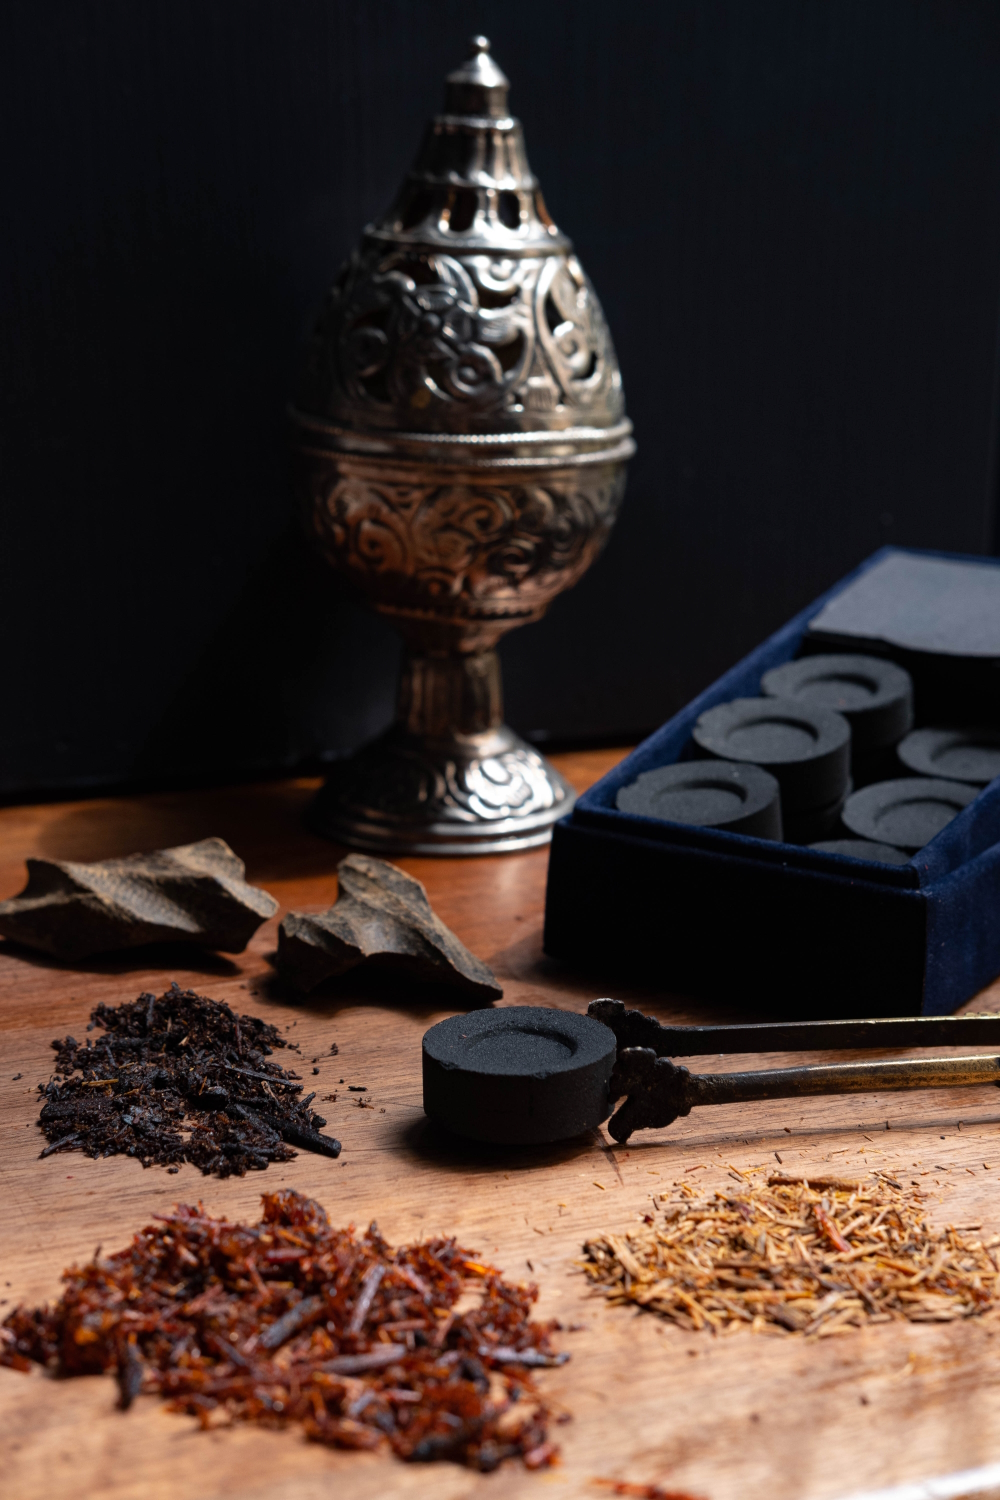 Ingredients for an incense ceremony kit.